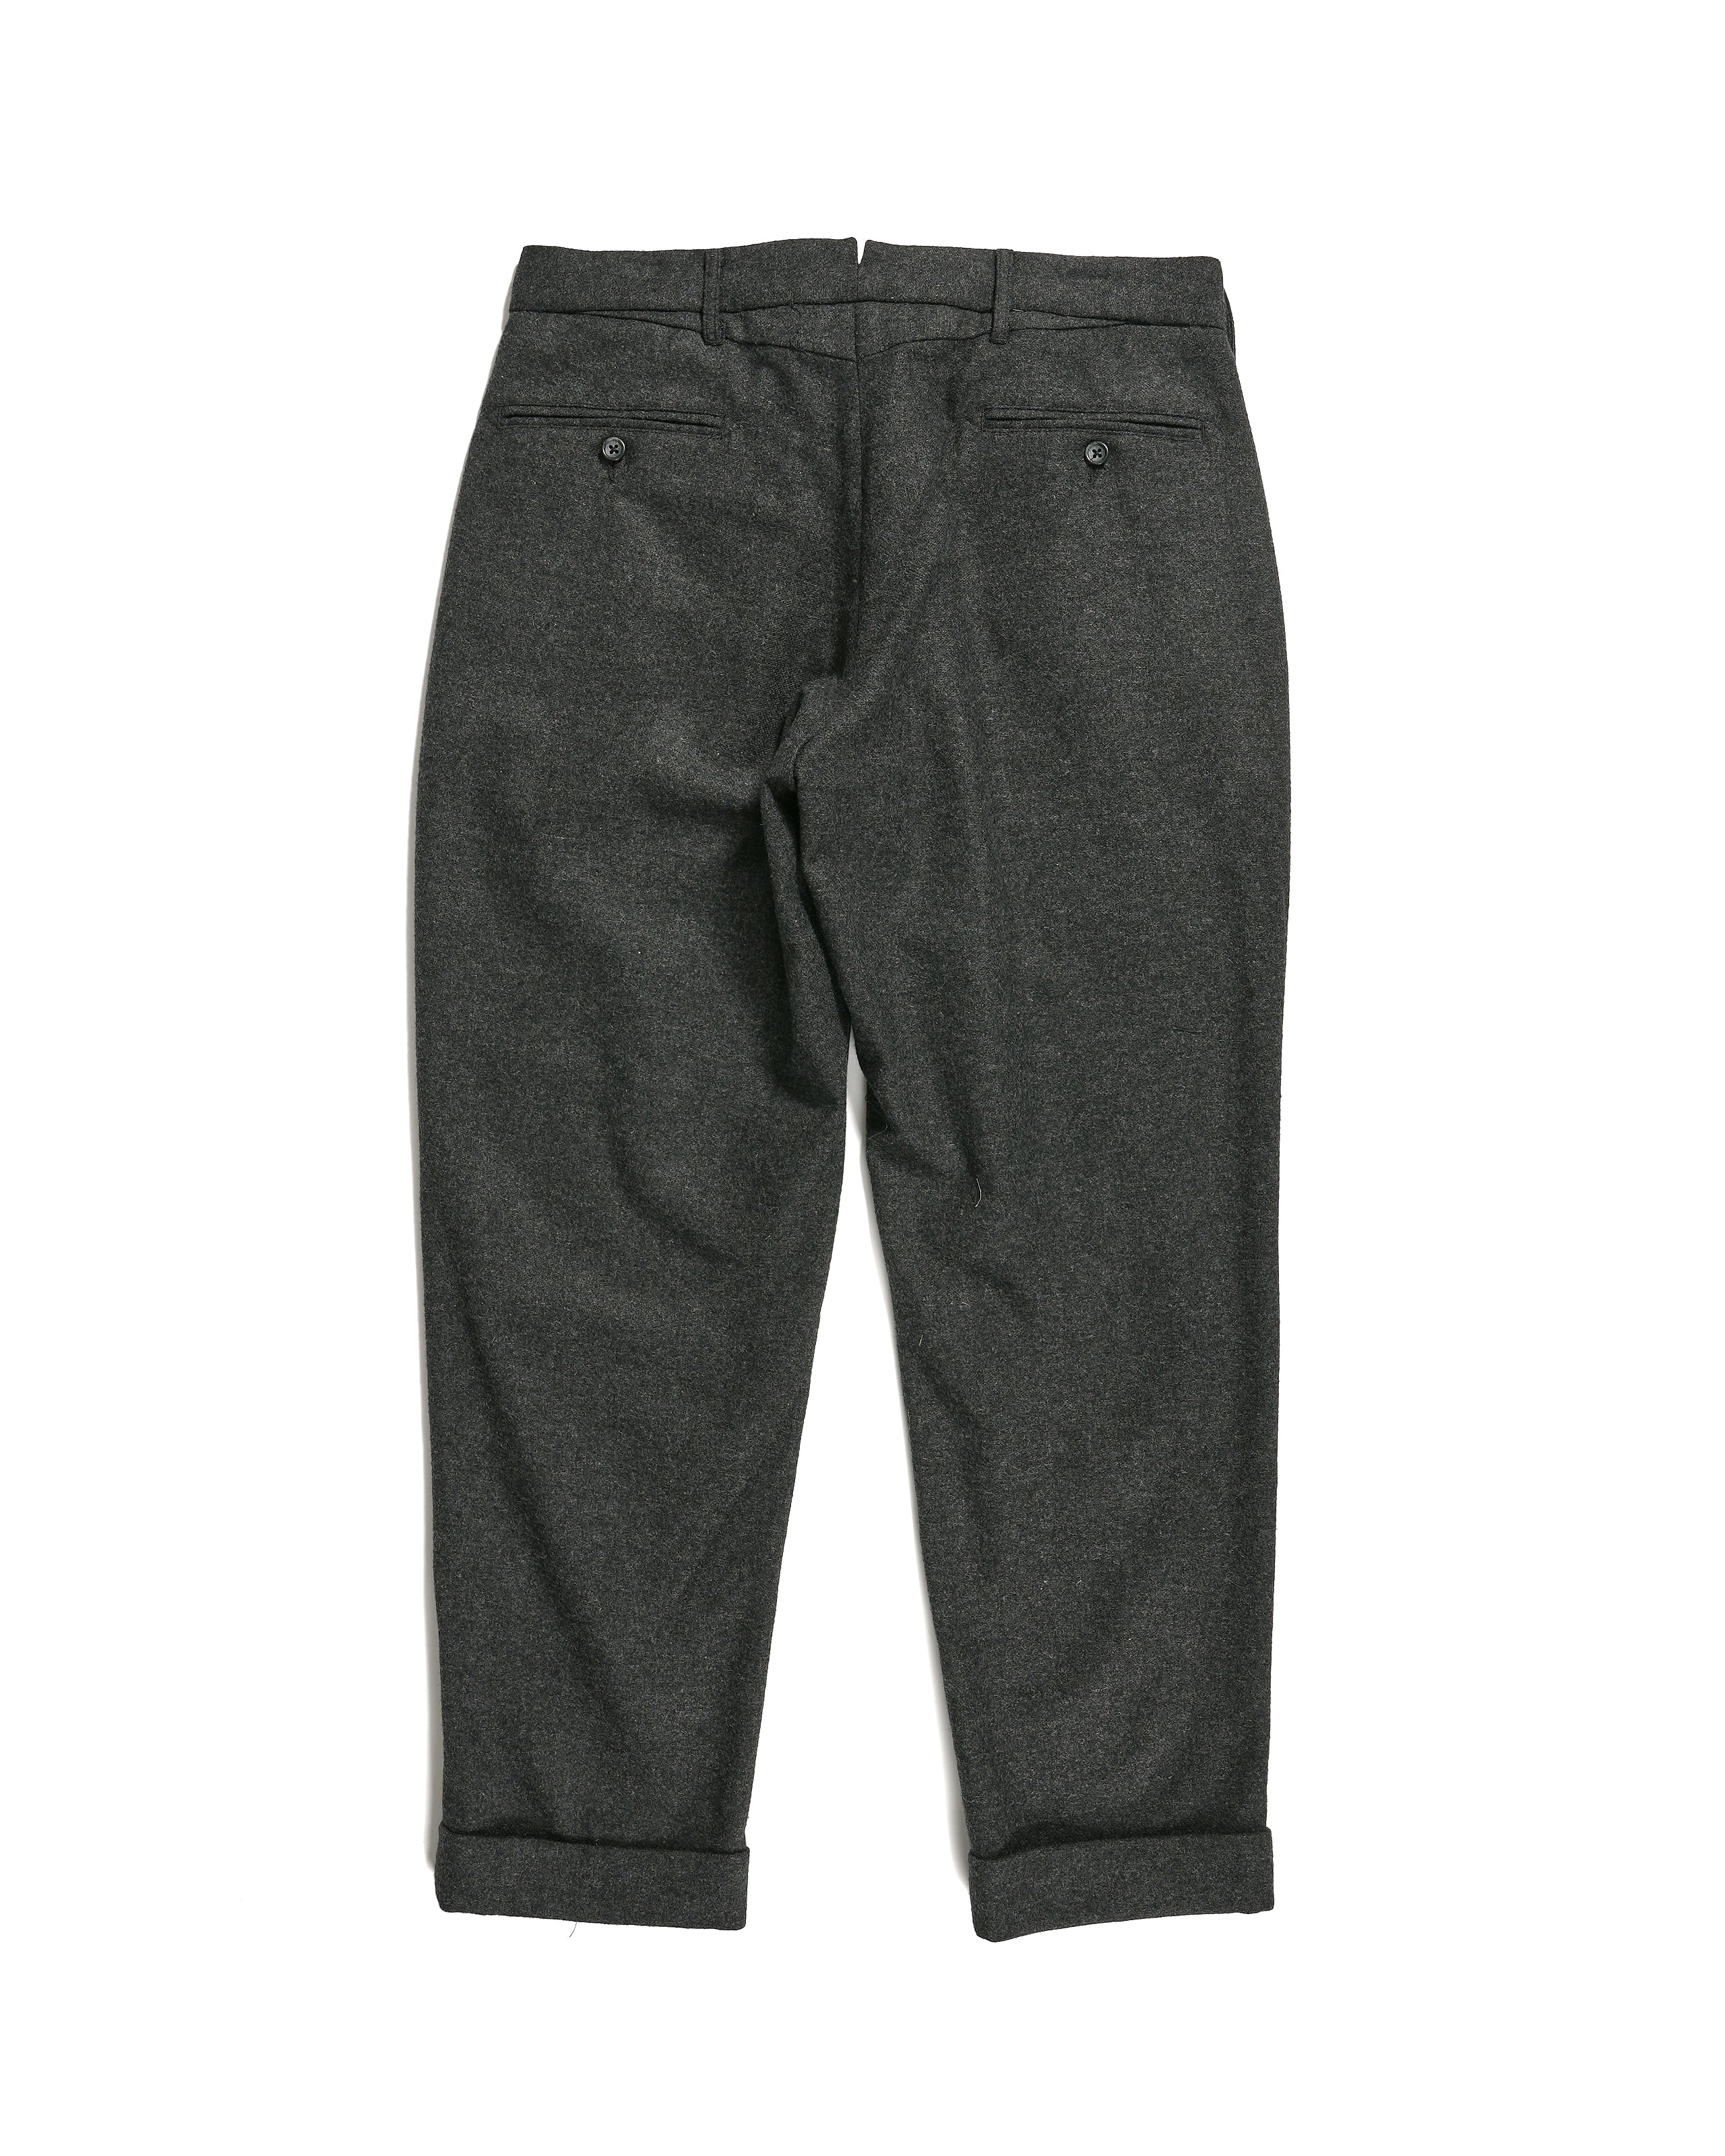 Engineered Garments Andover Pant - Grey Solid Poly Wool Flannel